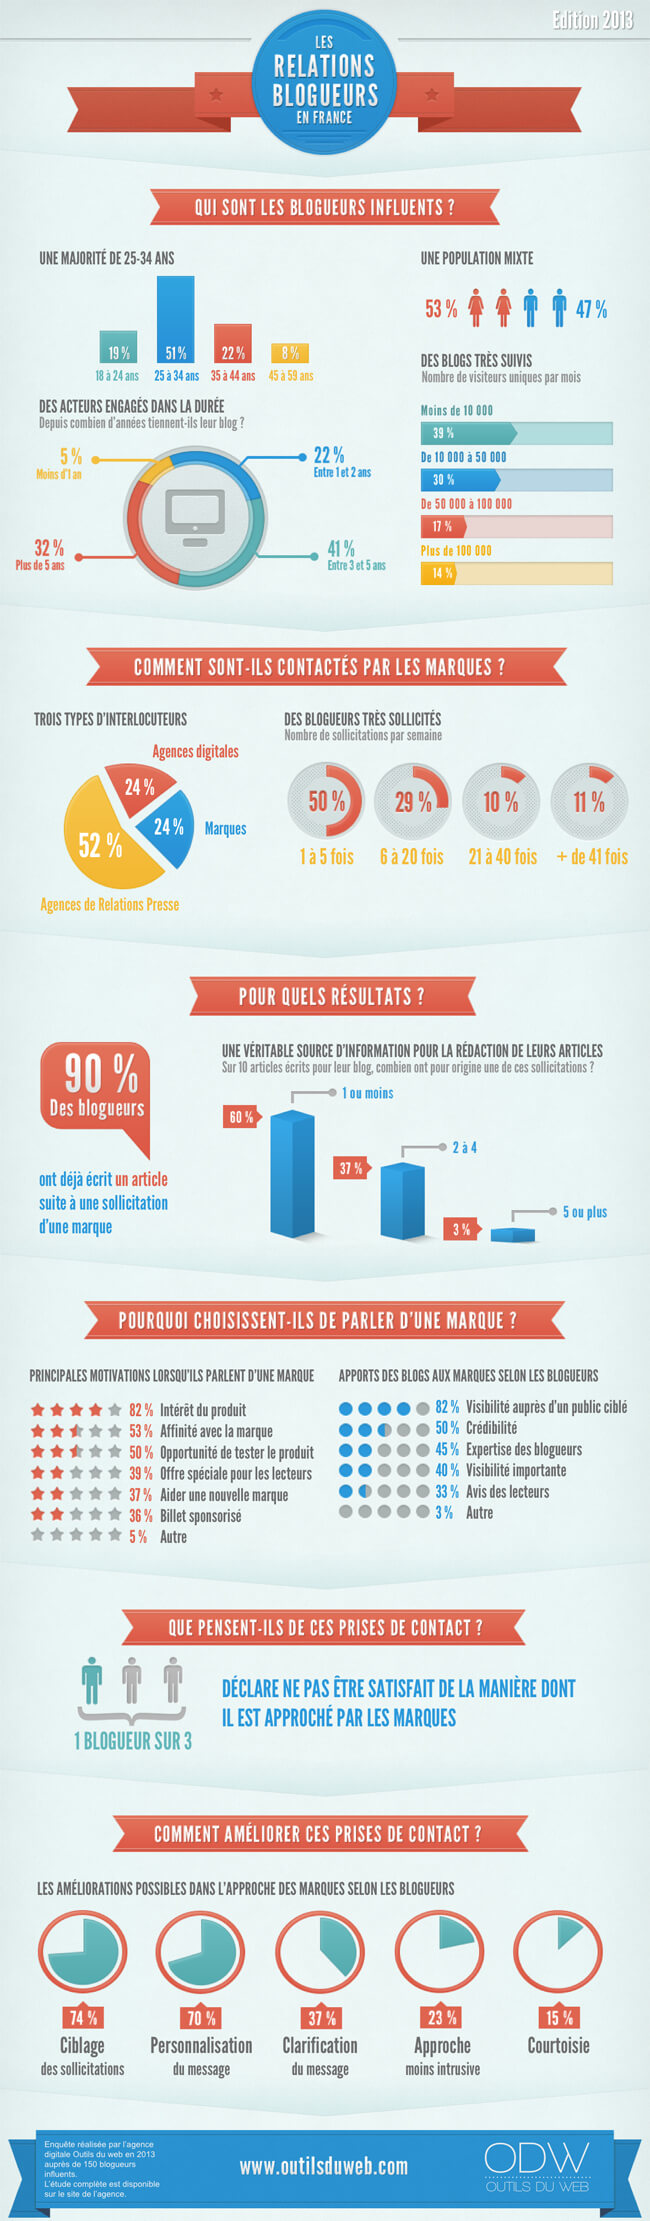 infographie relations blogueurs